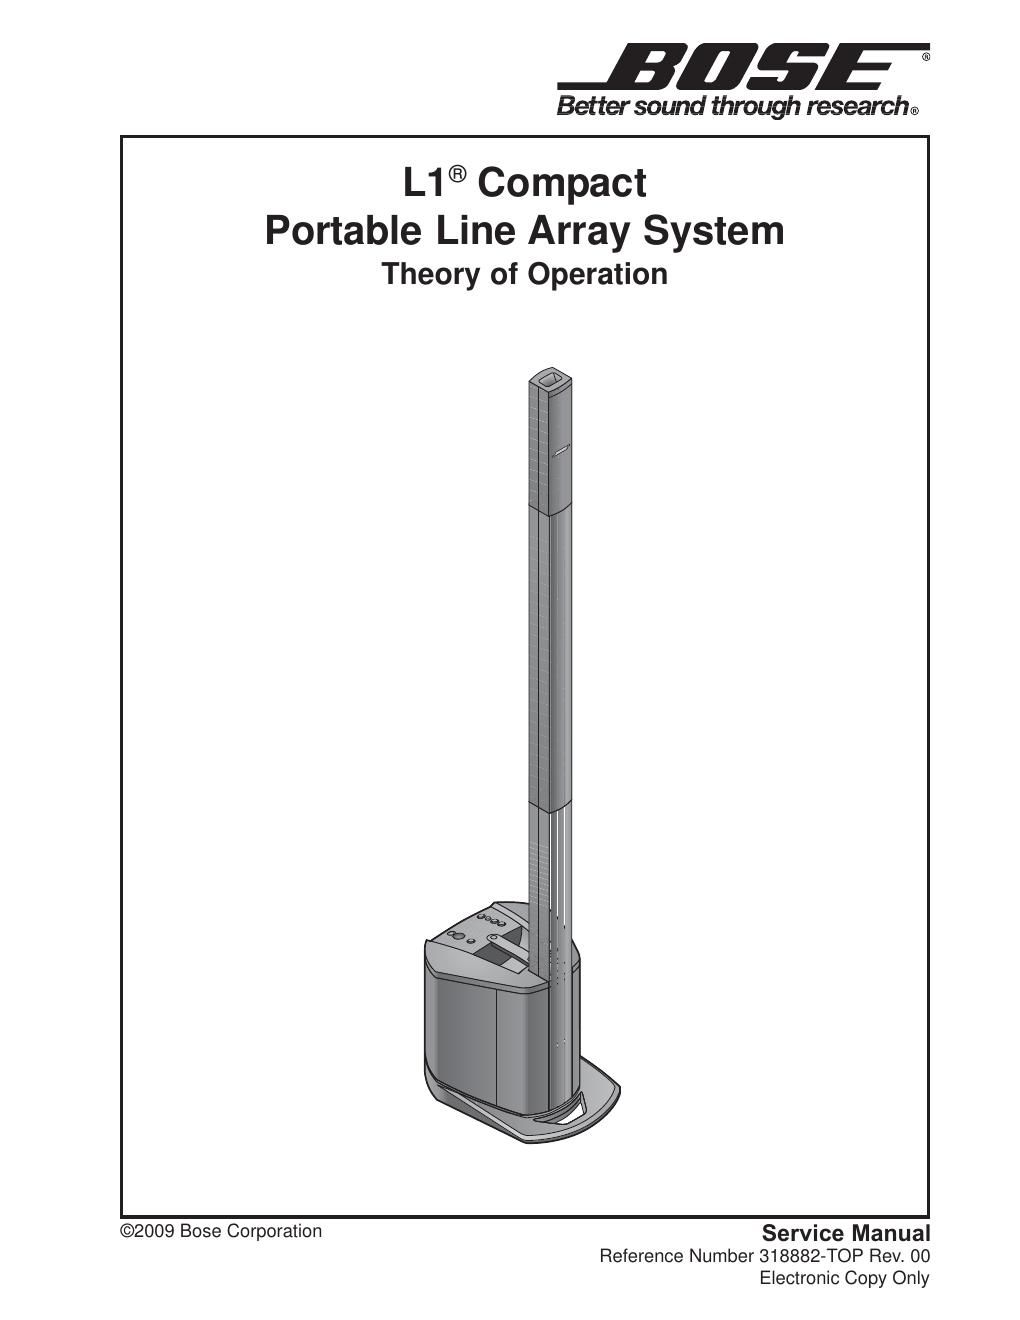 bose l1 compact system theory of operation